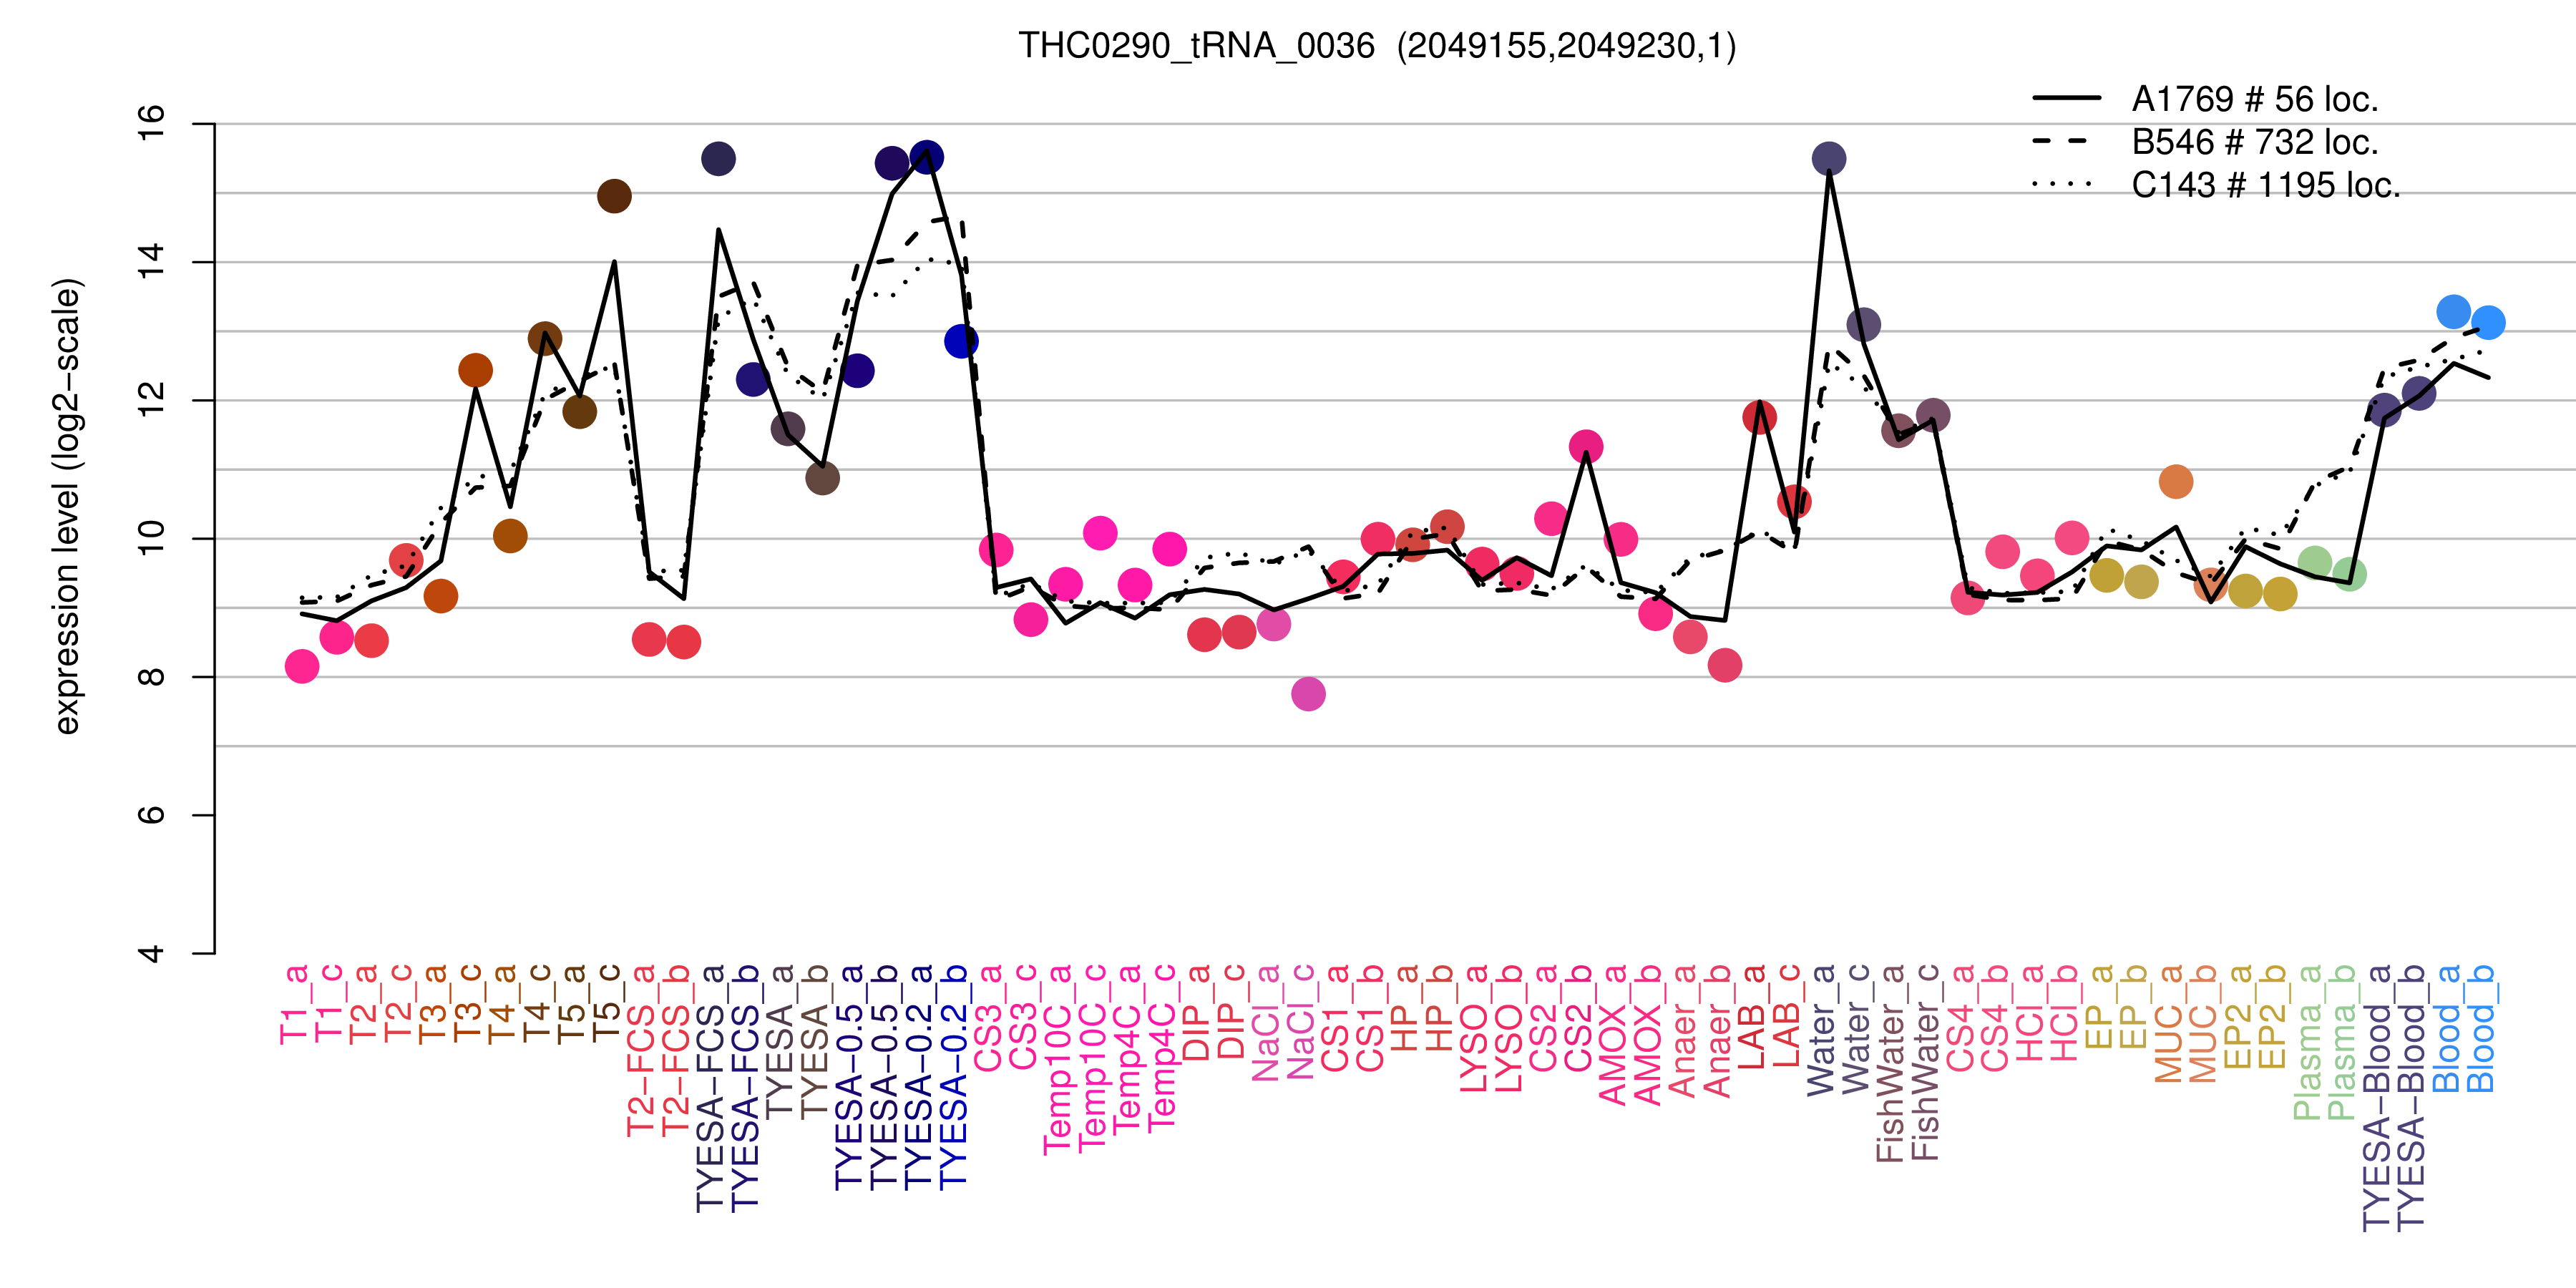 THC0290_tRNA_0036 expression levels among conditions